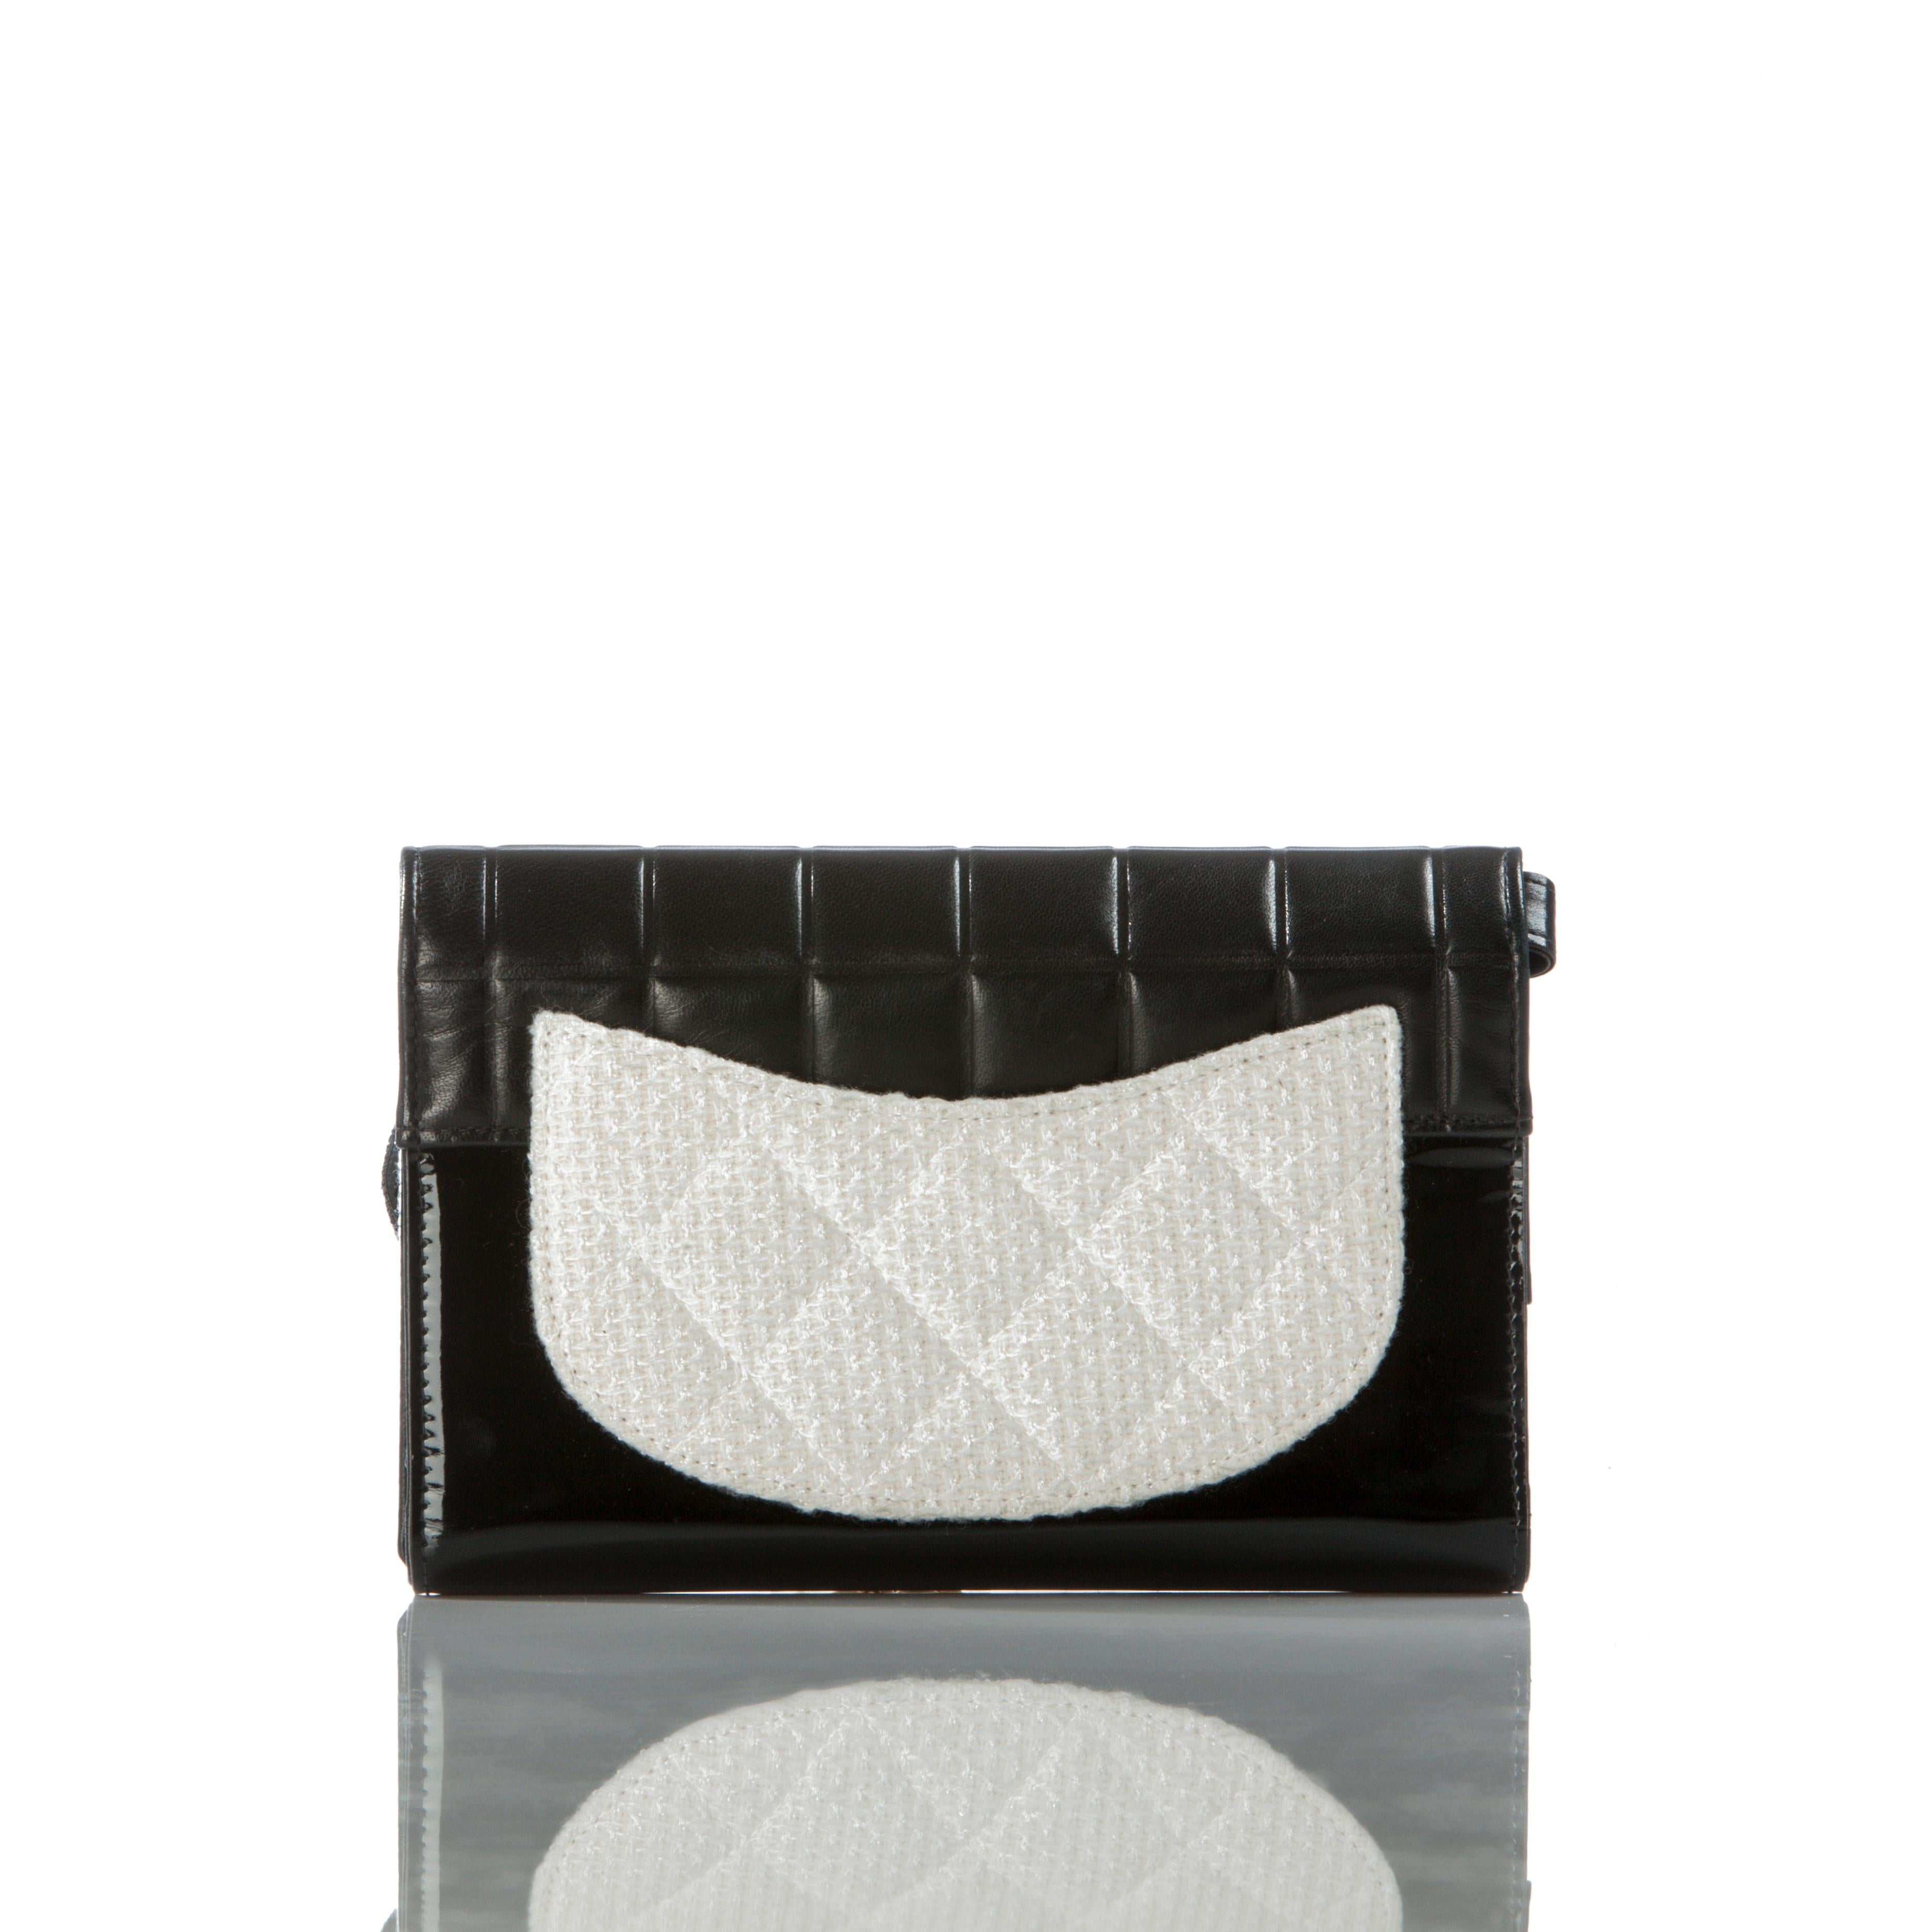 Chanel Timeless Tweed Iconic Camelia Flower Bicolor Black & White Leather Clutch In Good Condition For Sale In Miami, FL